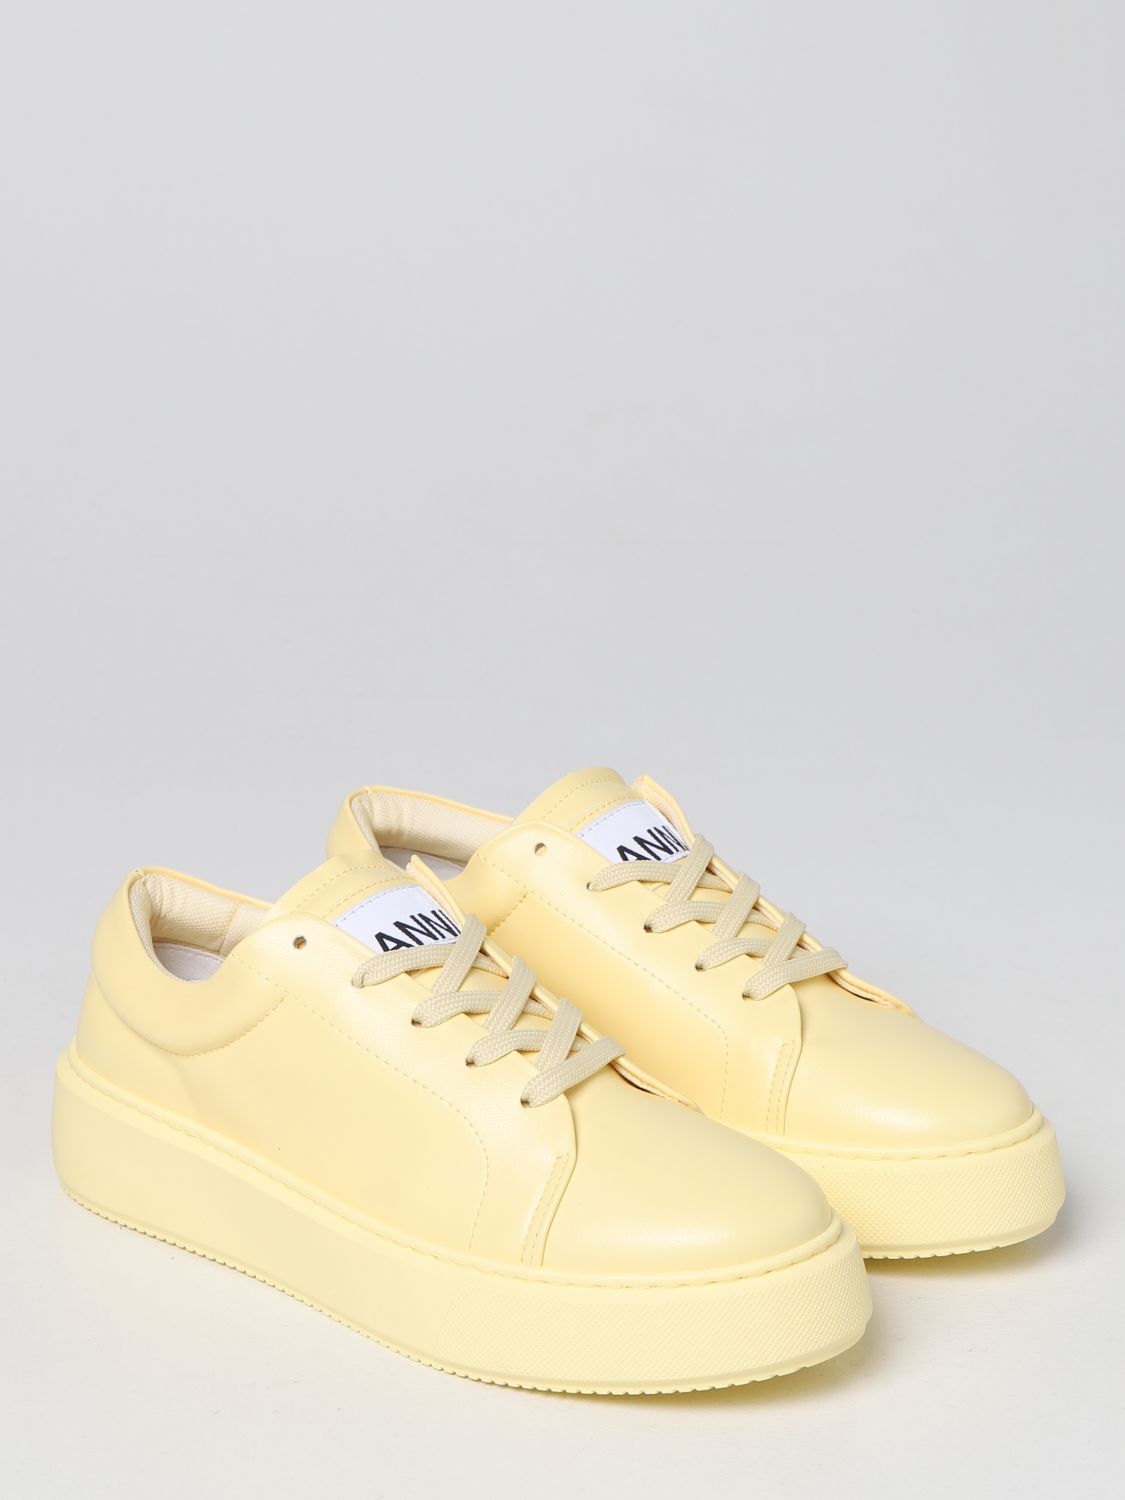 GANNI: Sporty synthetic leather sneakers Yellow | Ganni S1789 online on